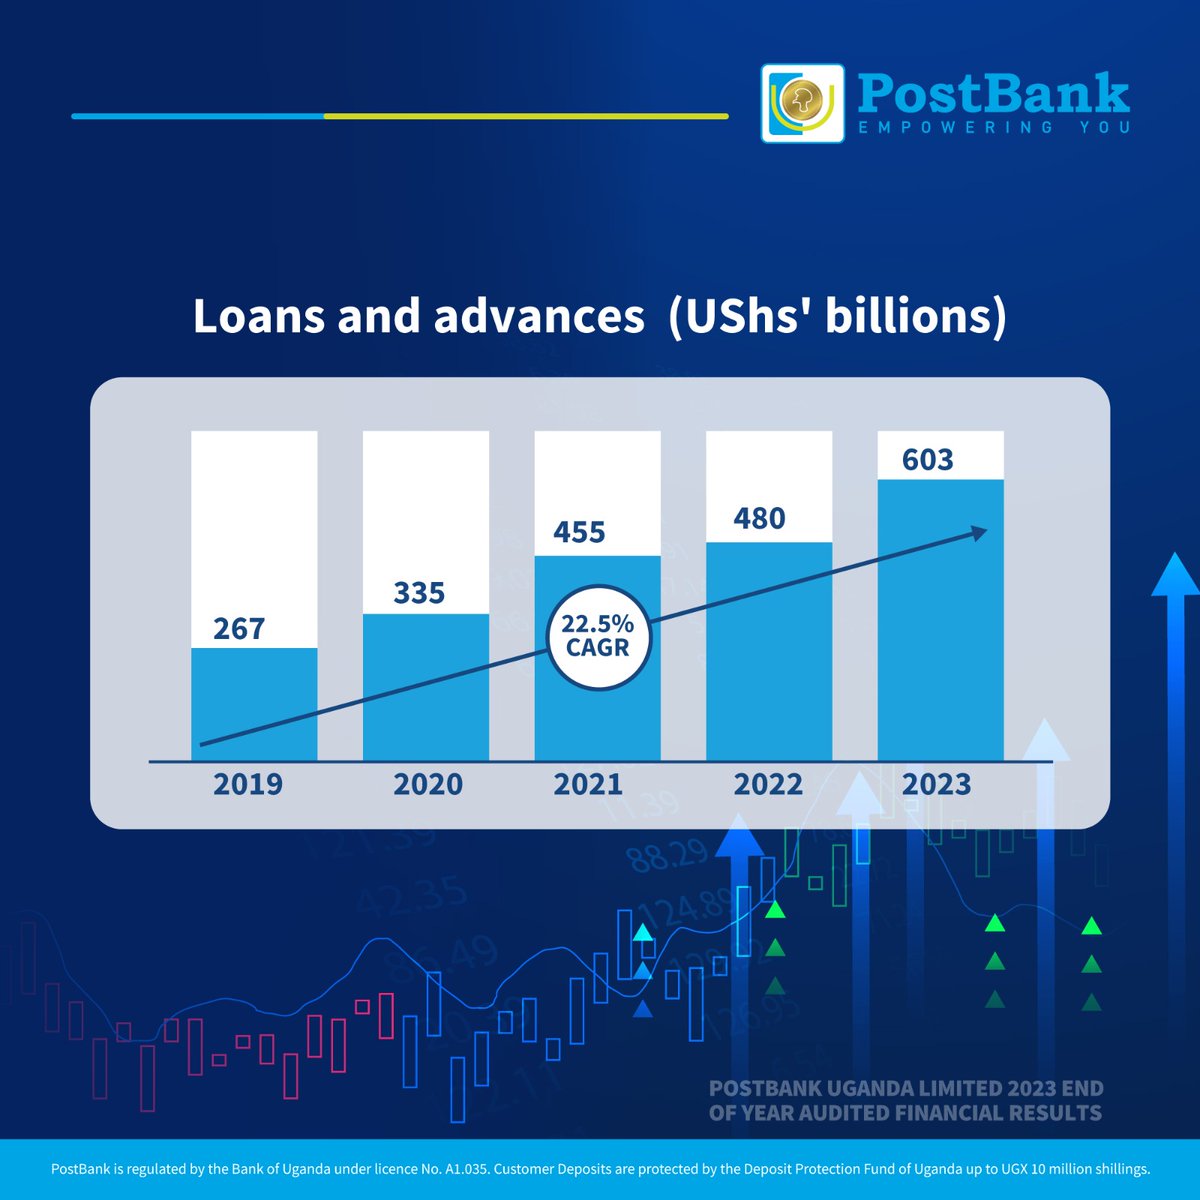 Setting new milestones! In 2023, we exponentially increased our lending to Ugandans by 23%, contributing Shs 123 billion more to agriculture and business. From Shs 480 billion in 2022 to Shs 603 billion in 2023, we are here to drive progress by empowering lives and livelihoods.…